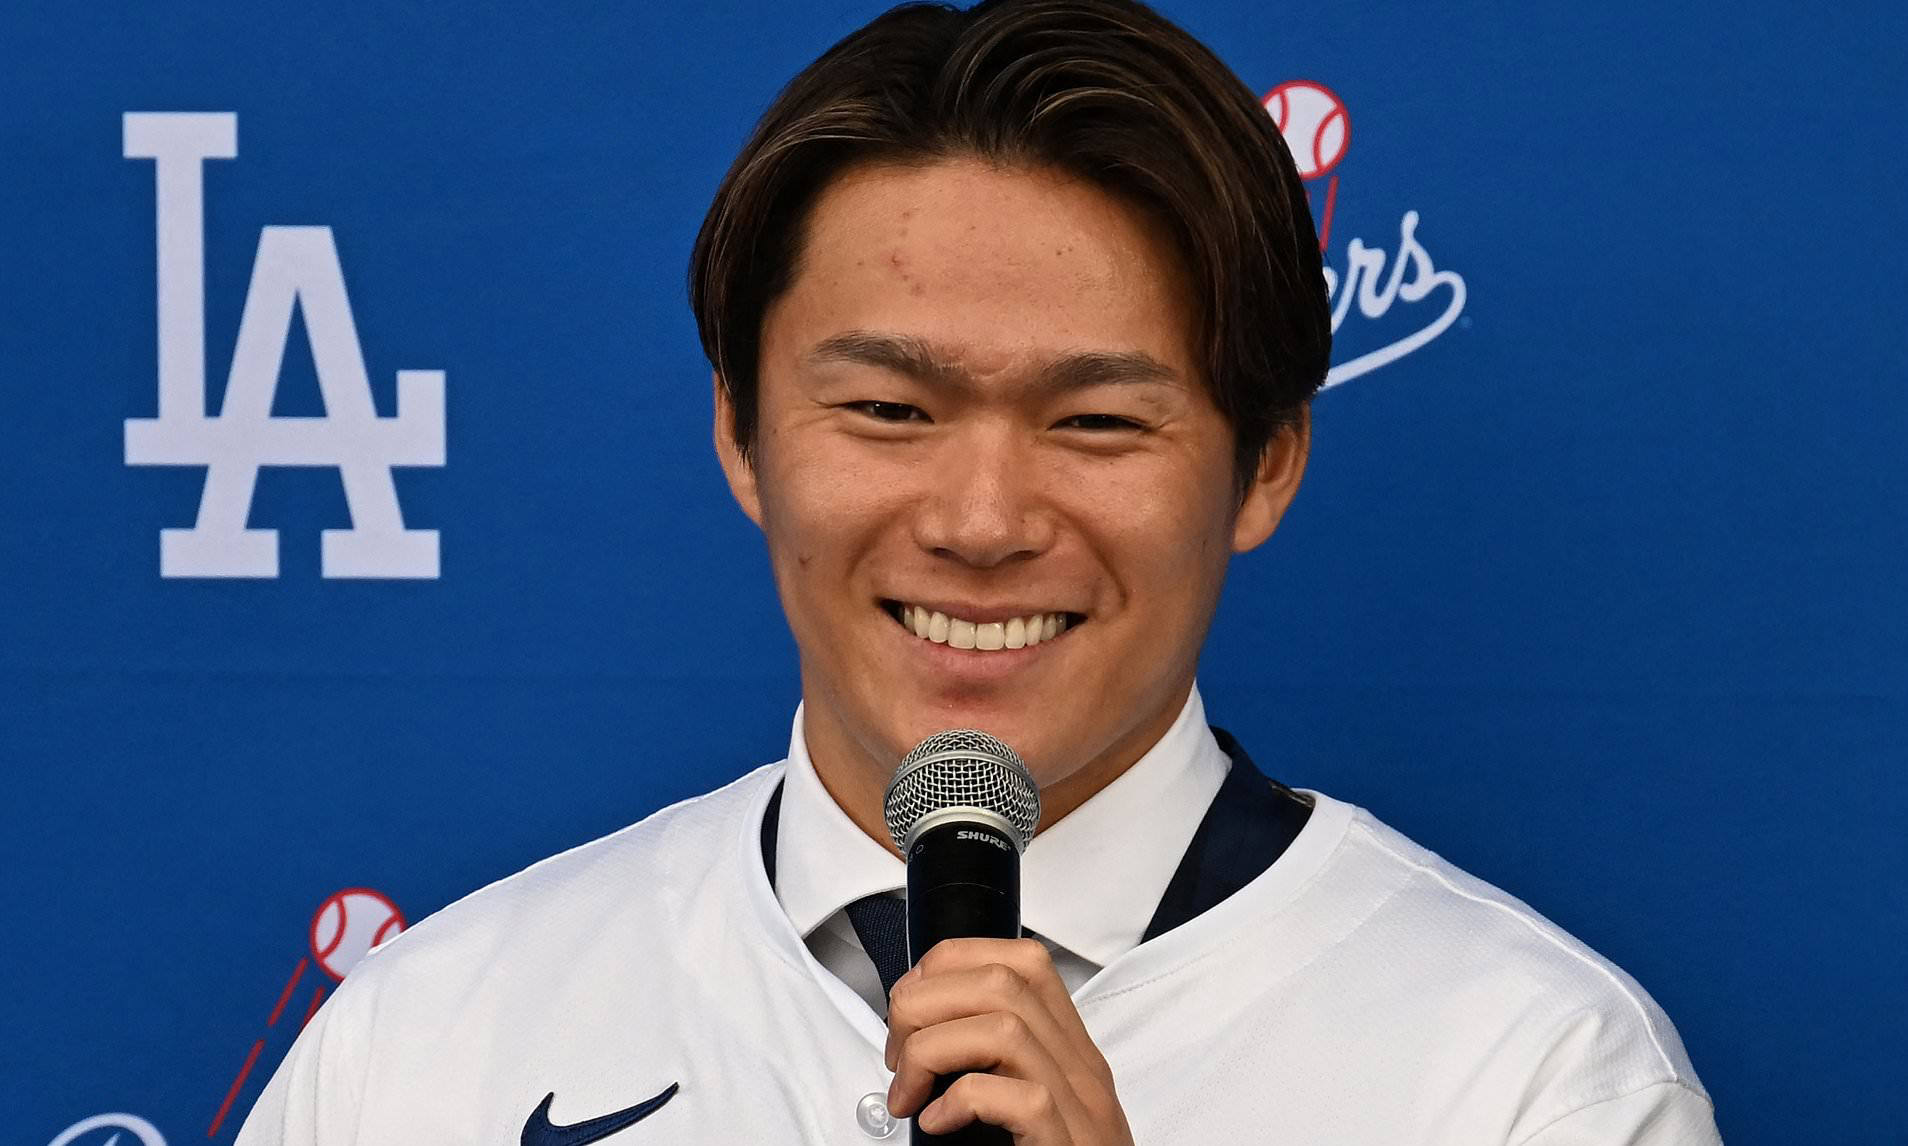 Yoshinobu Yamamoto has two ways he could opt out of $325m Dodgers deal